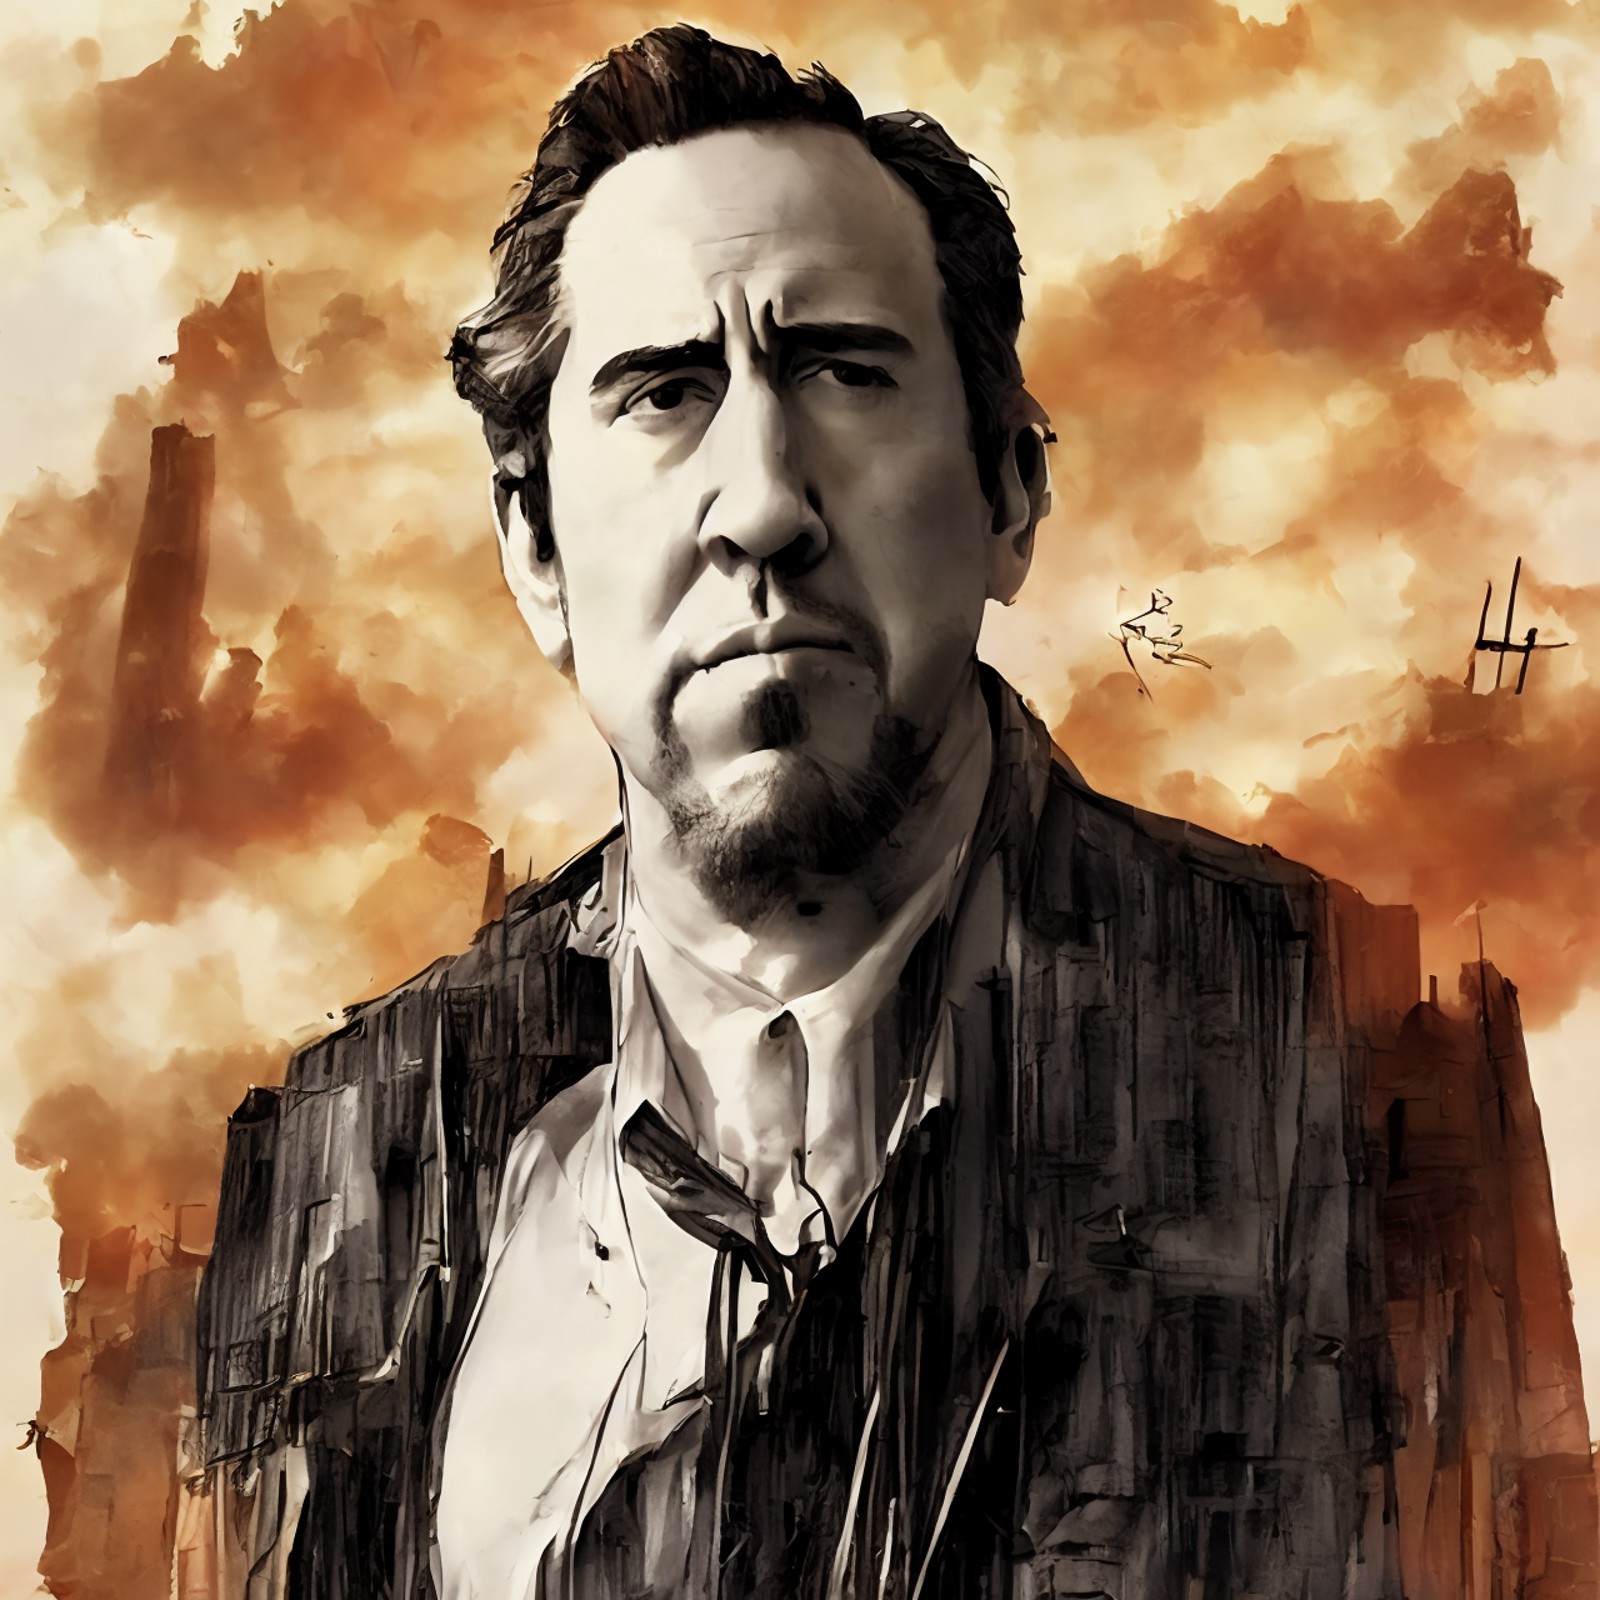 digital Ink, Nicholas Cage as president, style by CyberCity